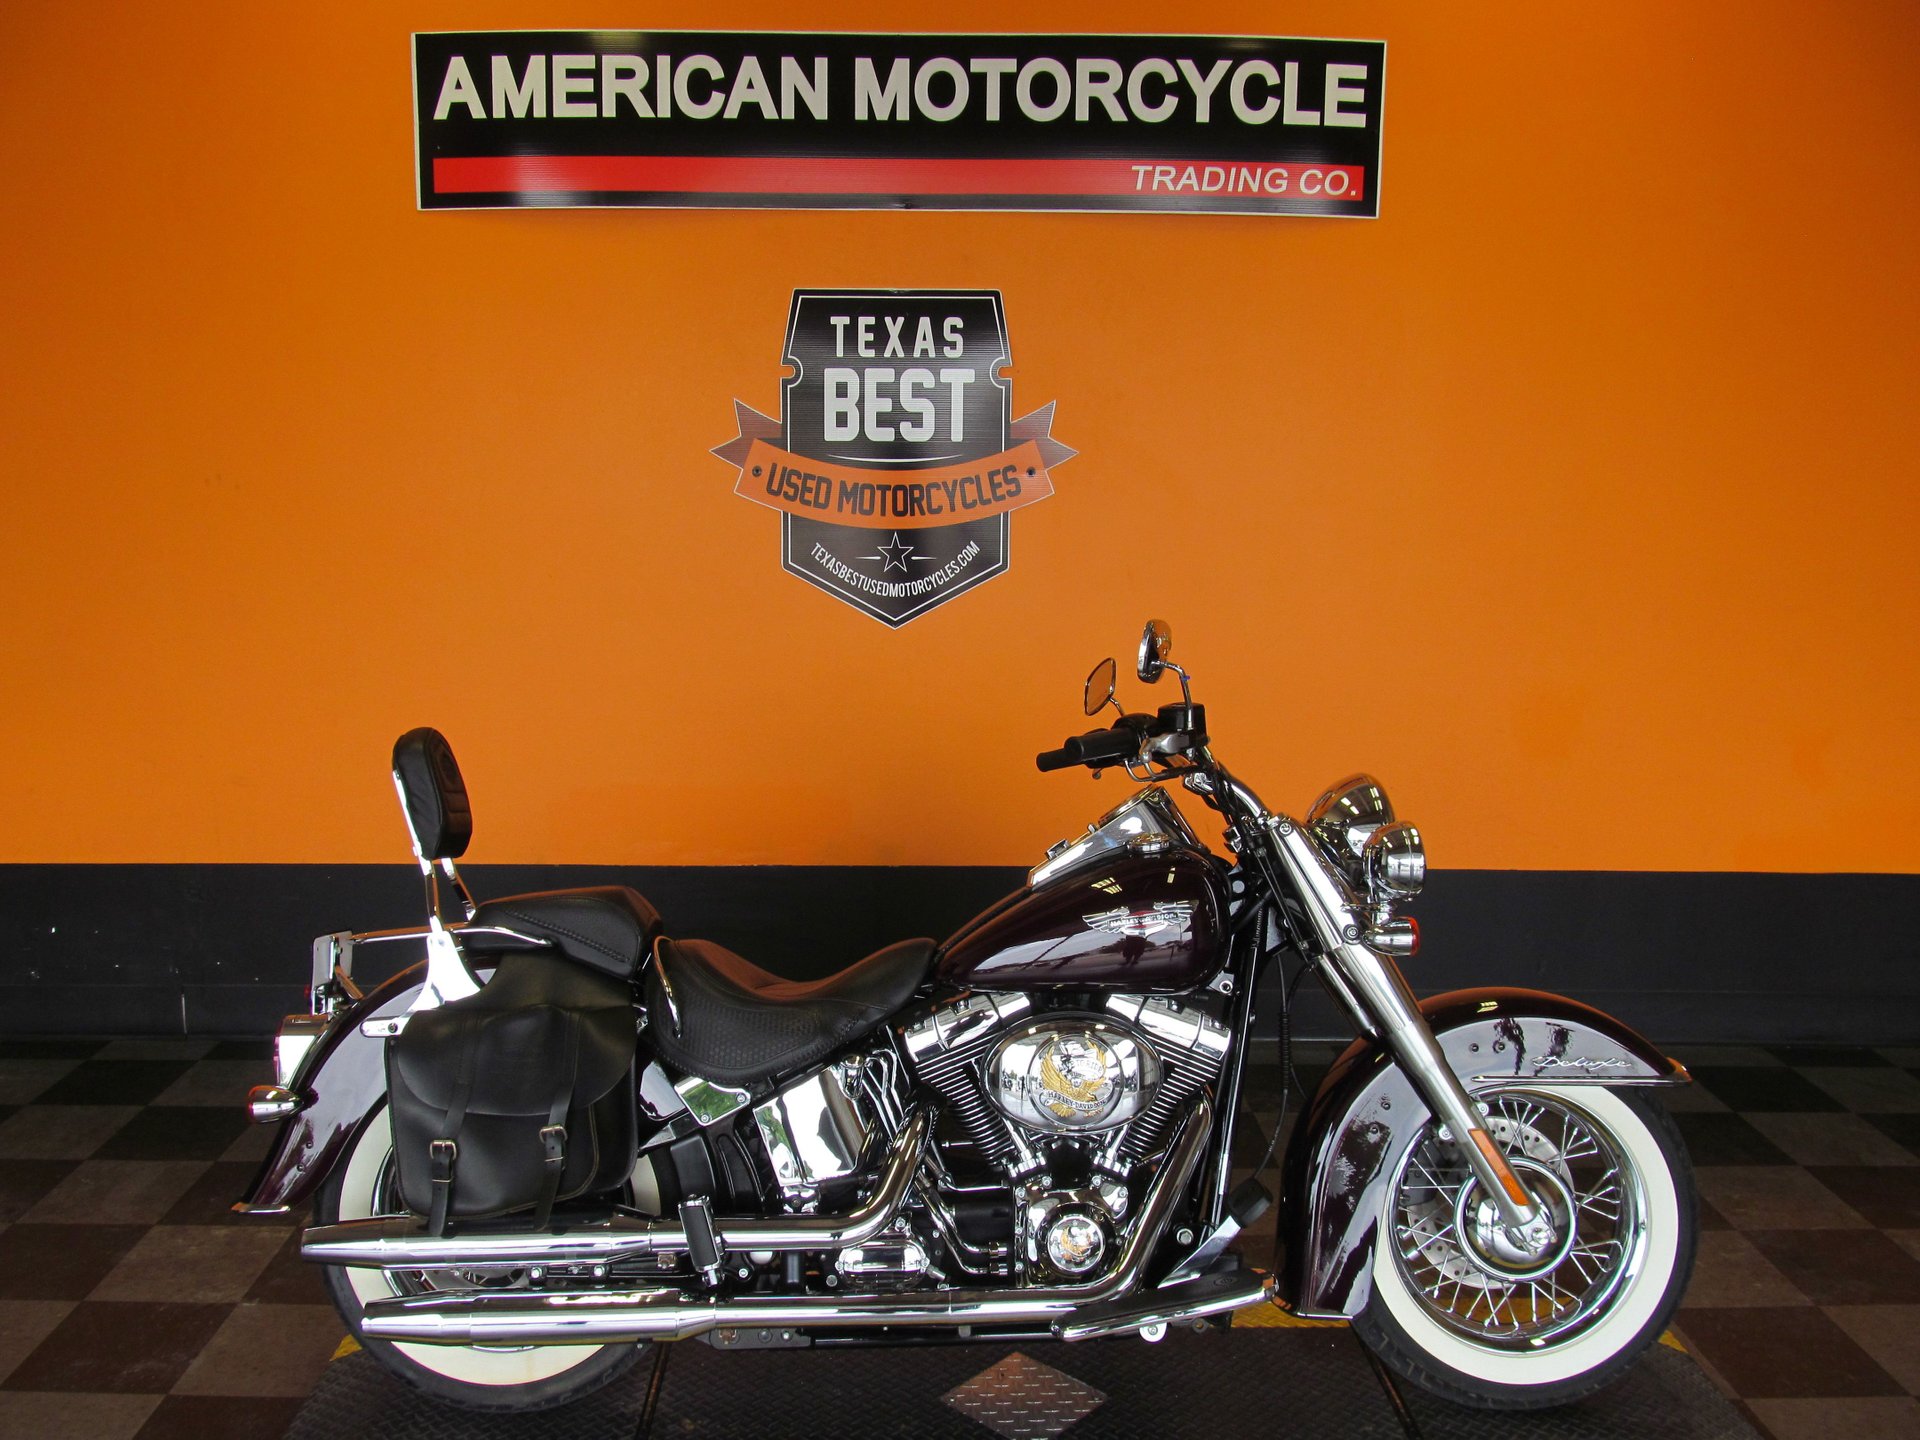 2006 Harley Davidson Softail Deluxe American Motorcycle Trading Company Used Harley Davidson Motorcycles